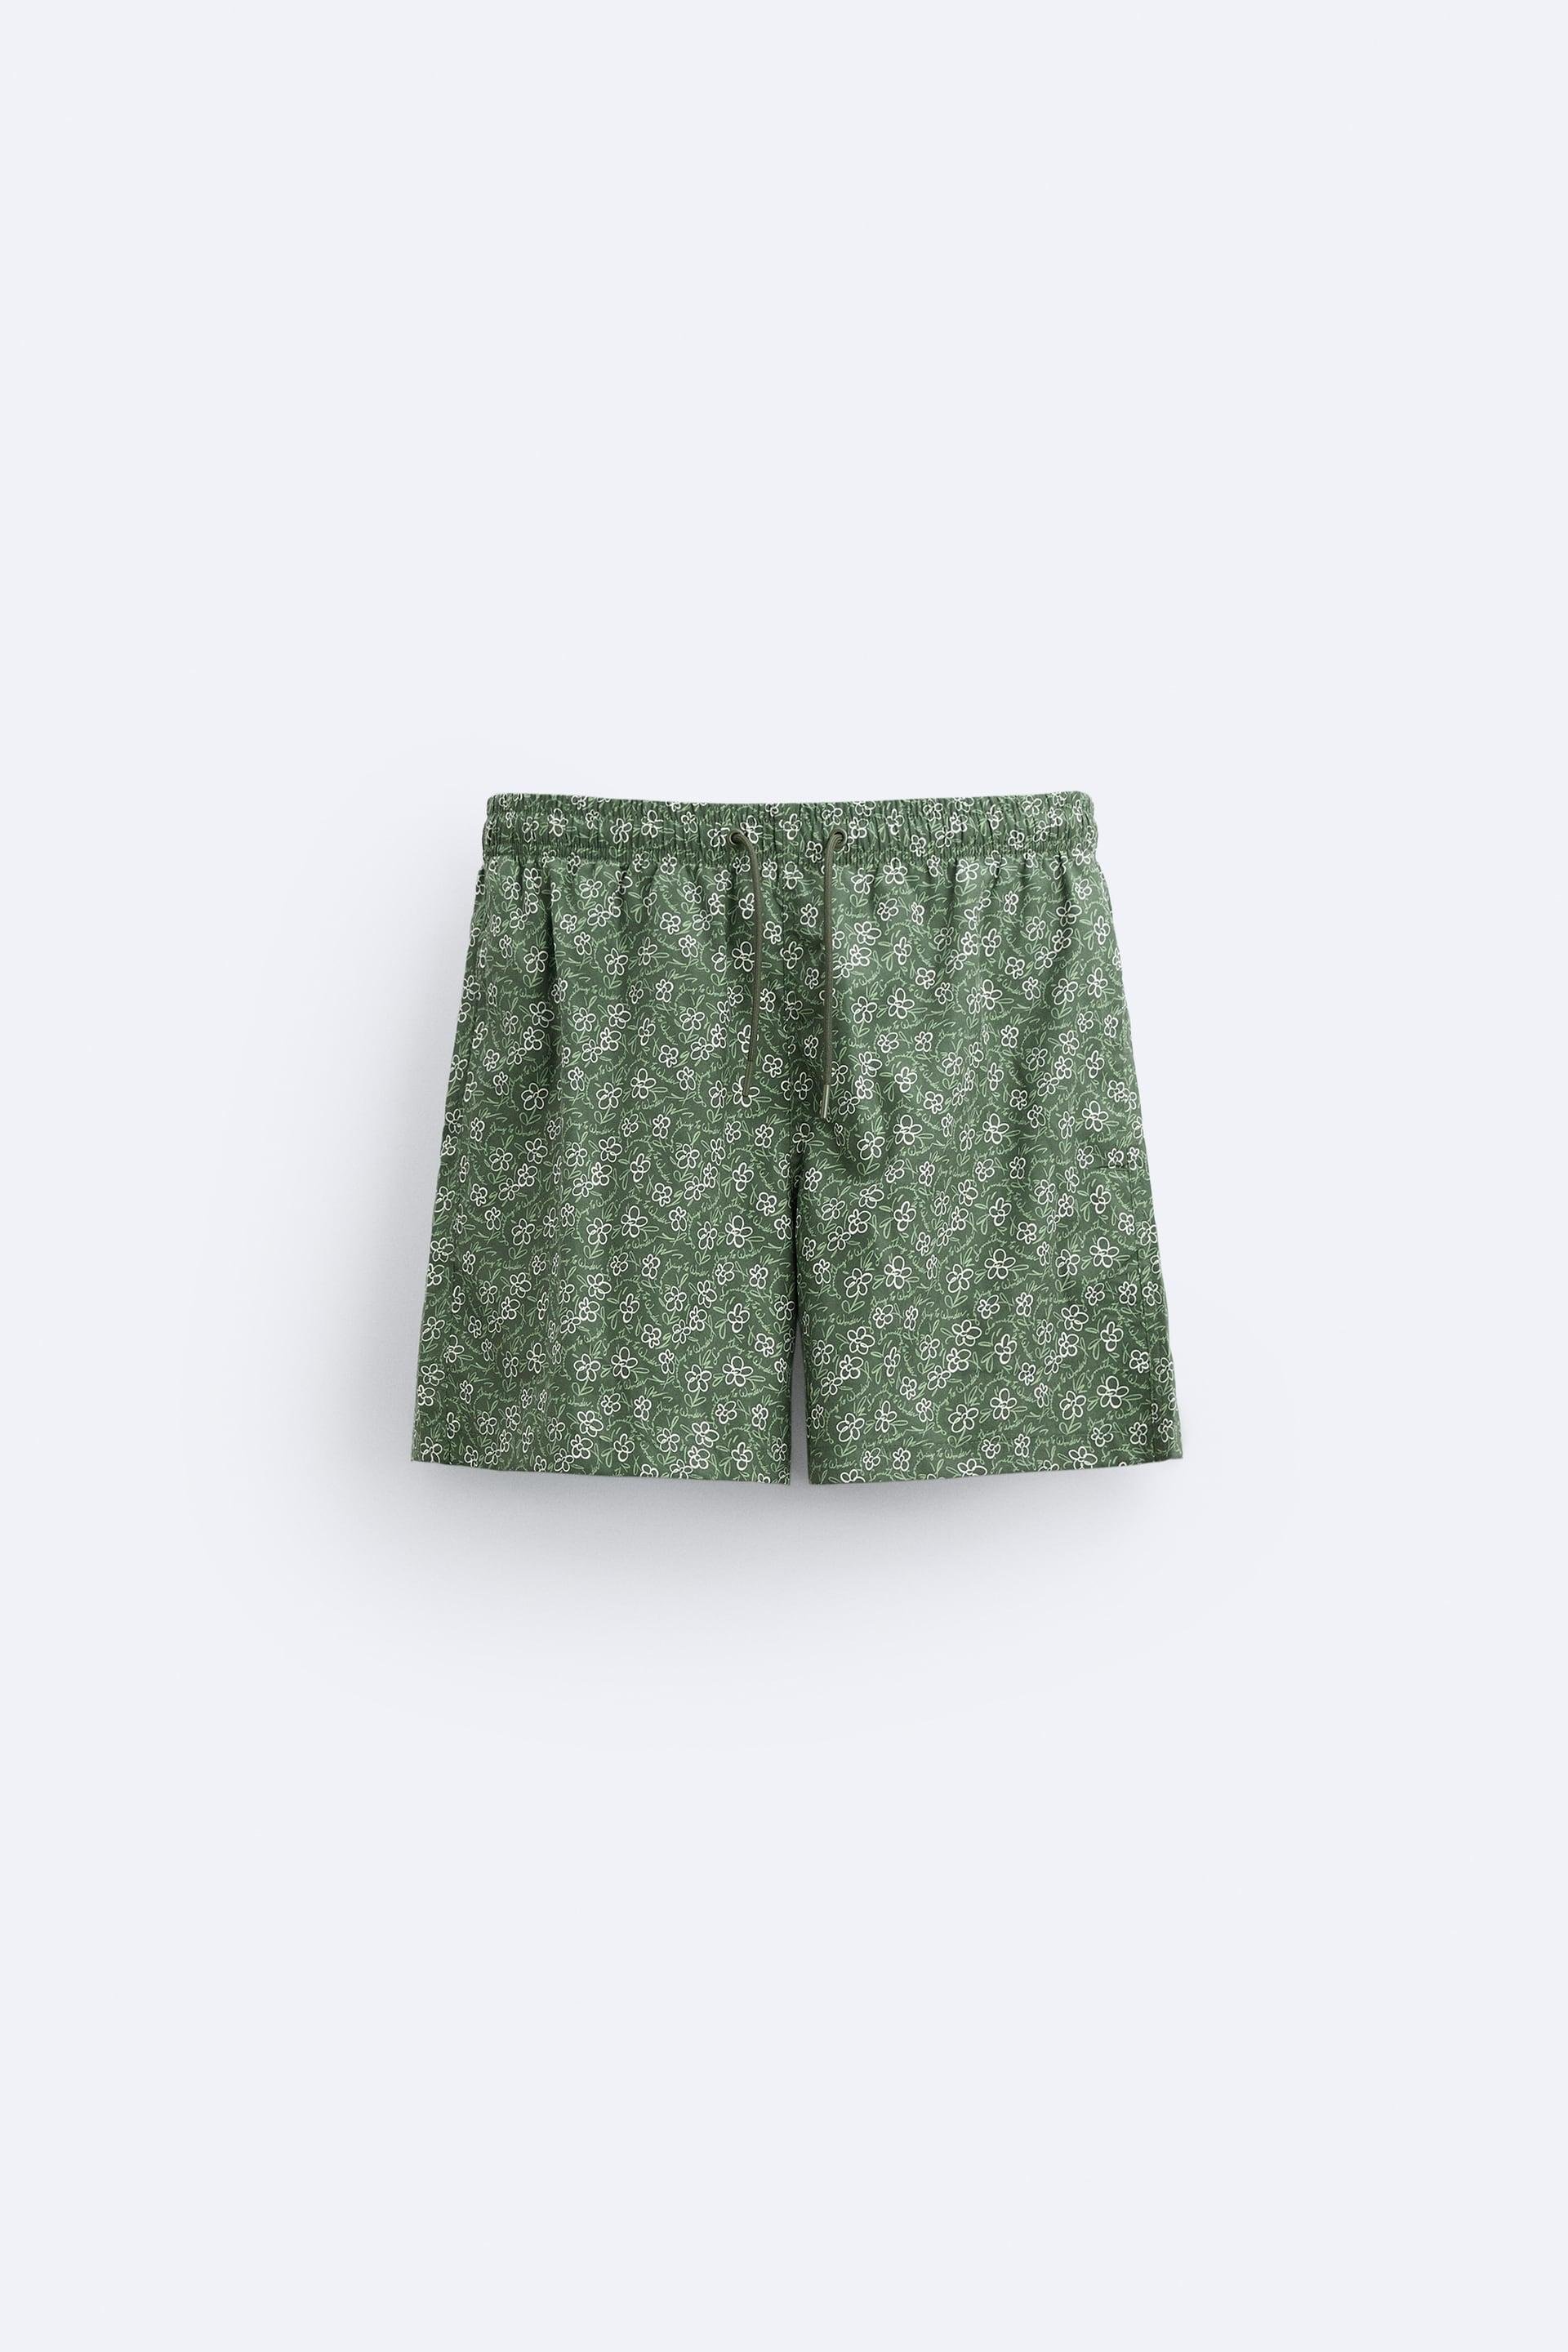 FLORAL PRINT SWIMMING TRUNKS by ZARA